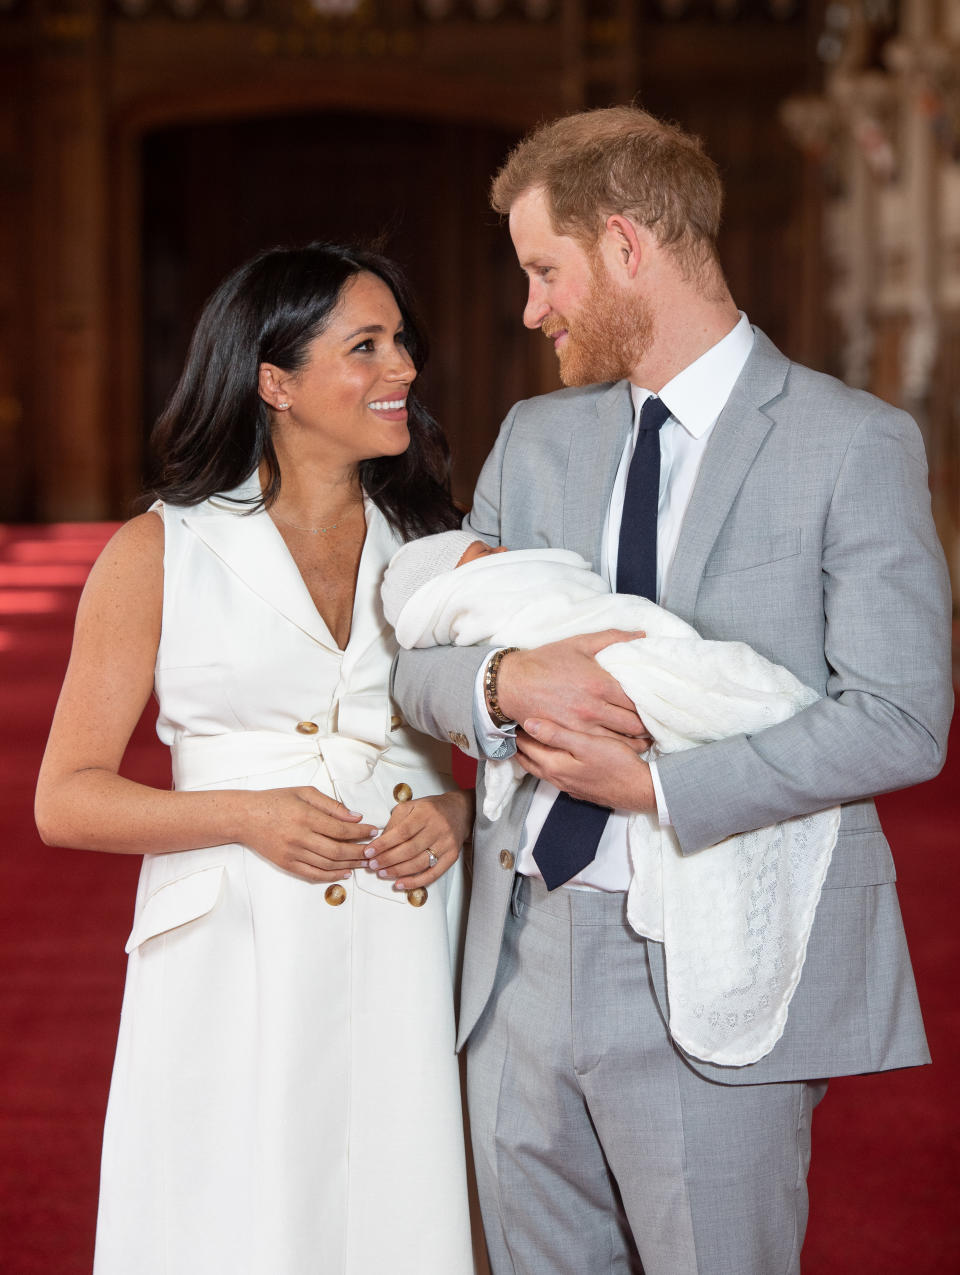 Harry and Meghan have attempted to shield Archie from the press as much as possible since he was born. Photo: Getty